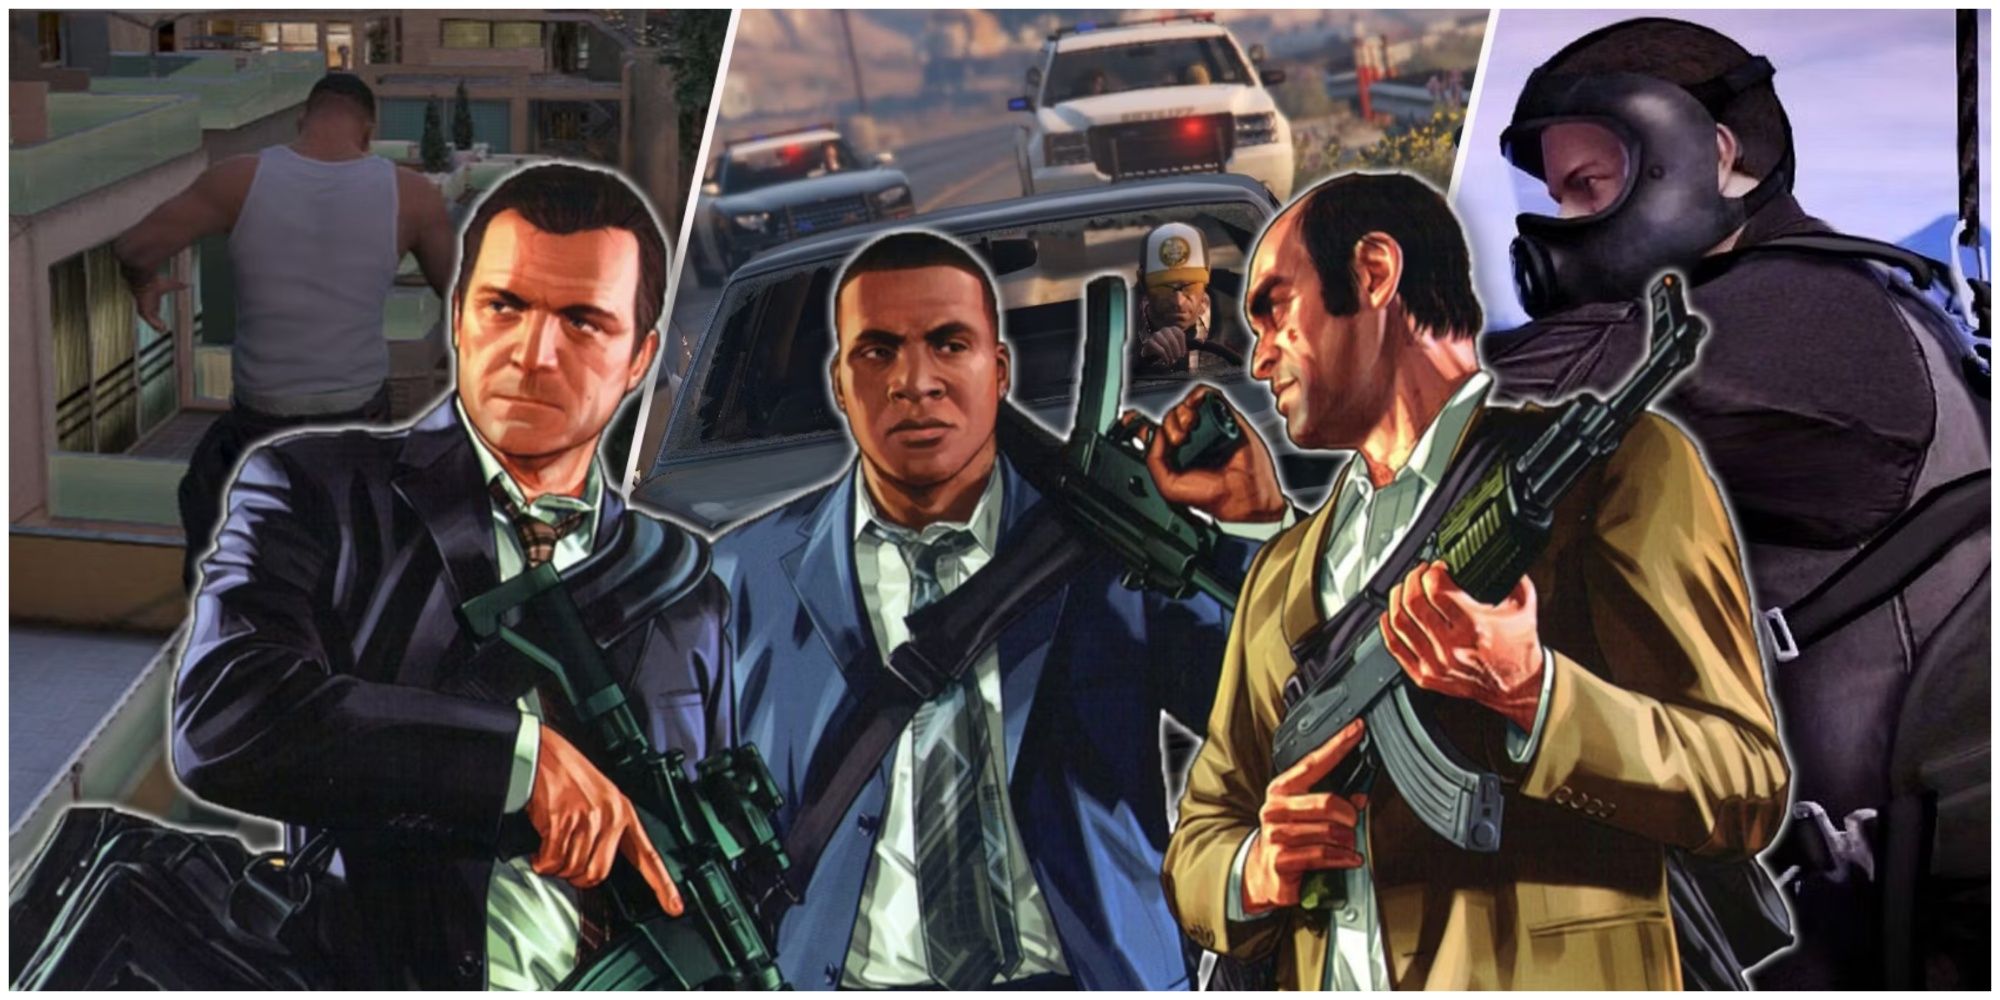 GTA 5 main characters against a background of in game images